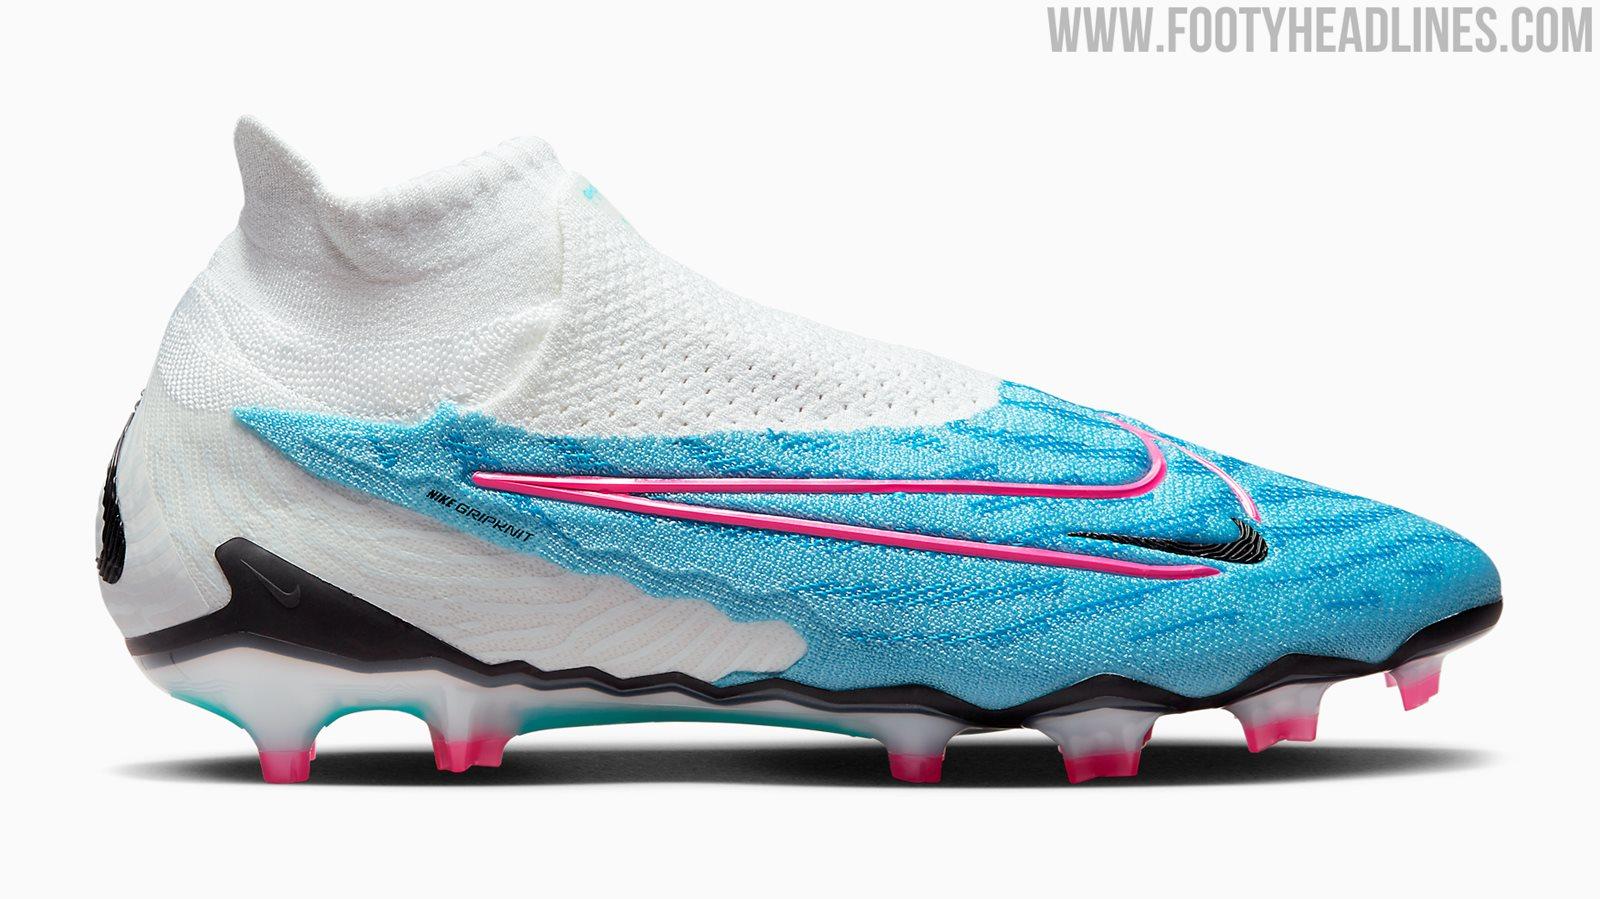 First Nike Phantom Gx On Pitch Boots Released Footy Headlines